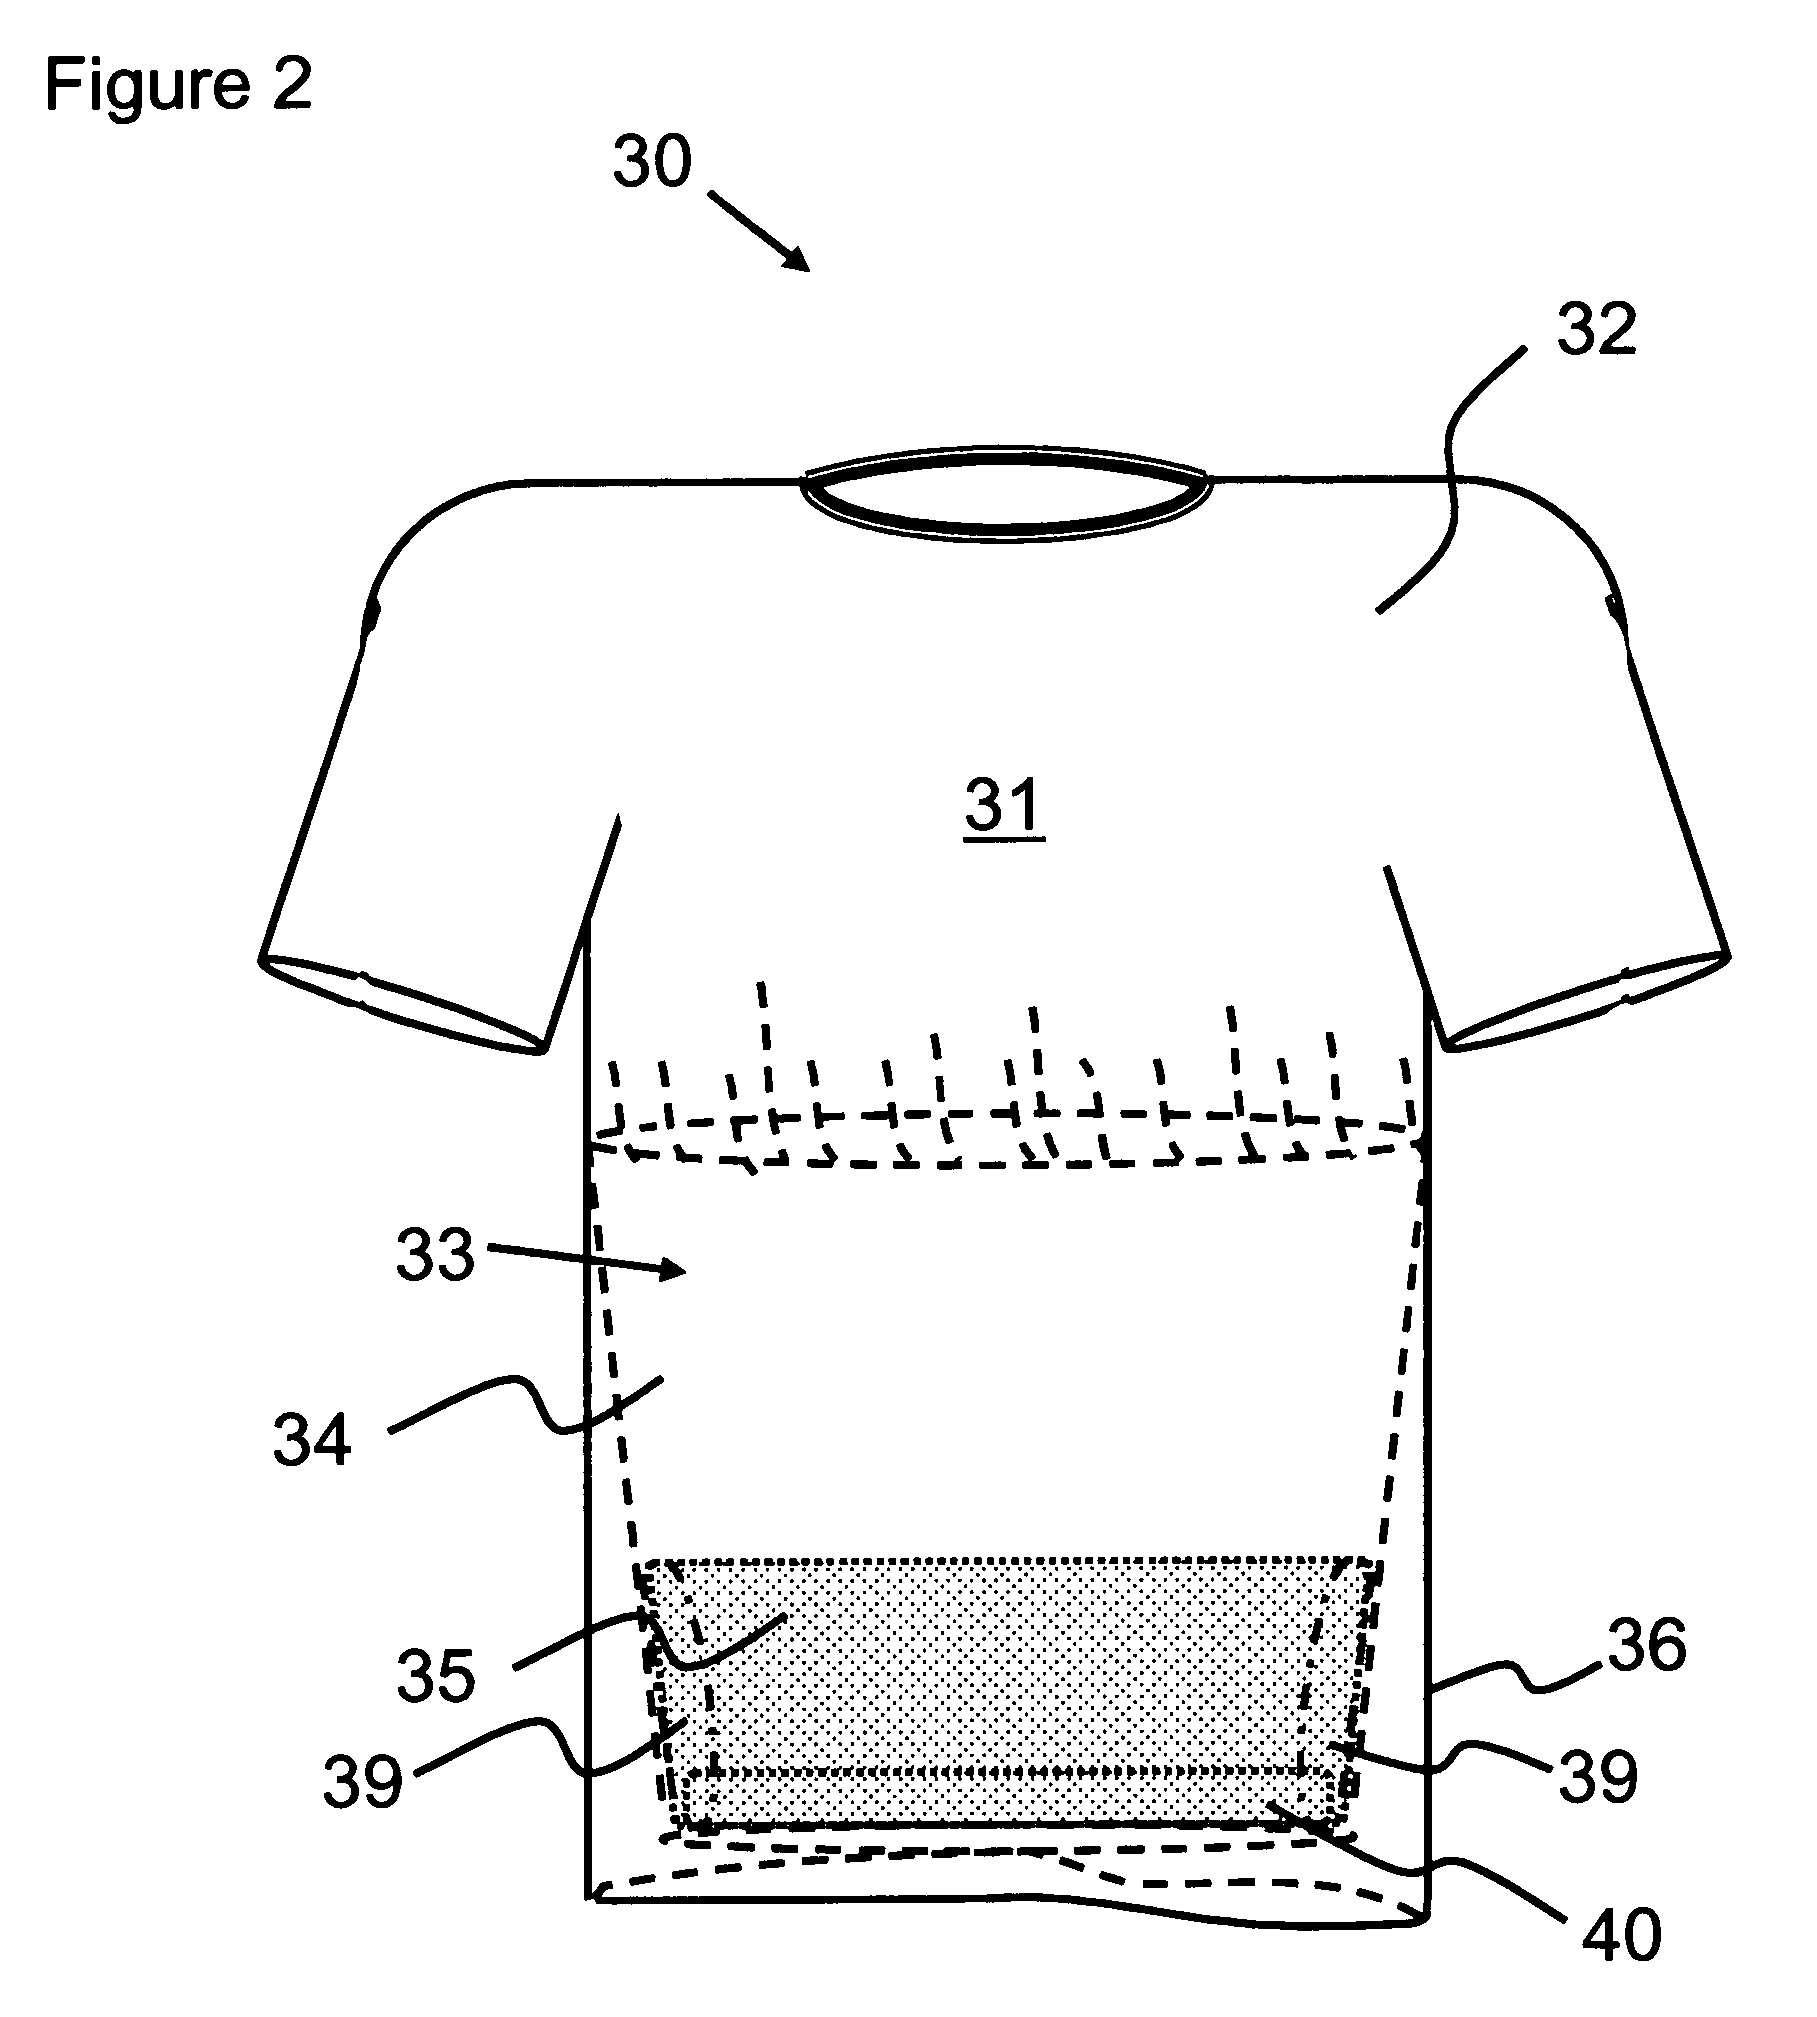 Shirt having form-fitting mid-section support